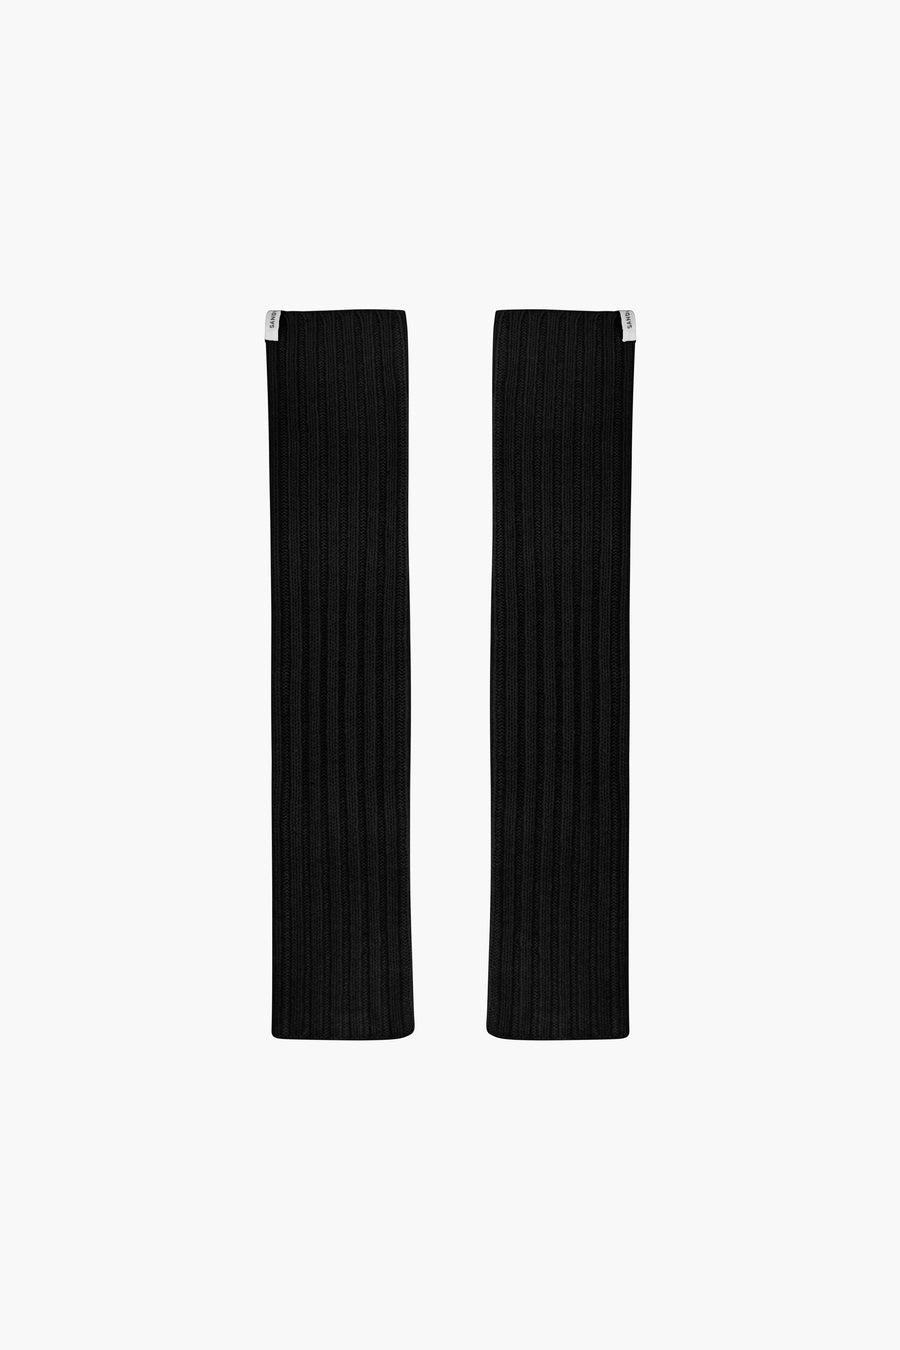 Knit arm warmers in black with thumbhole